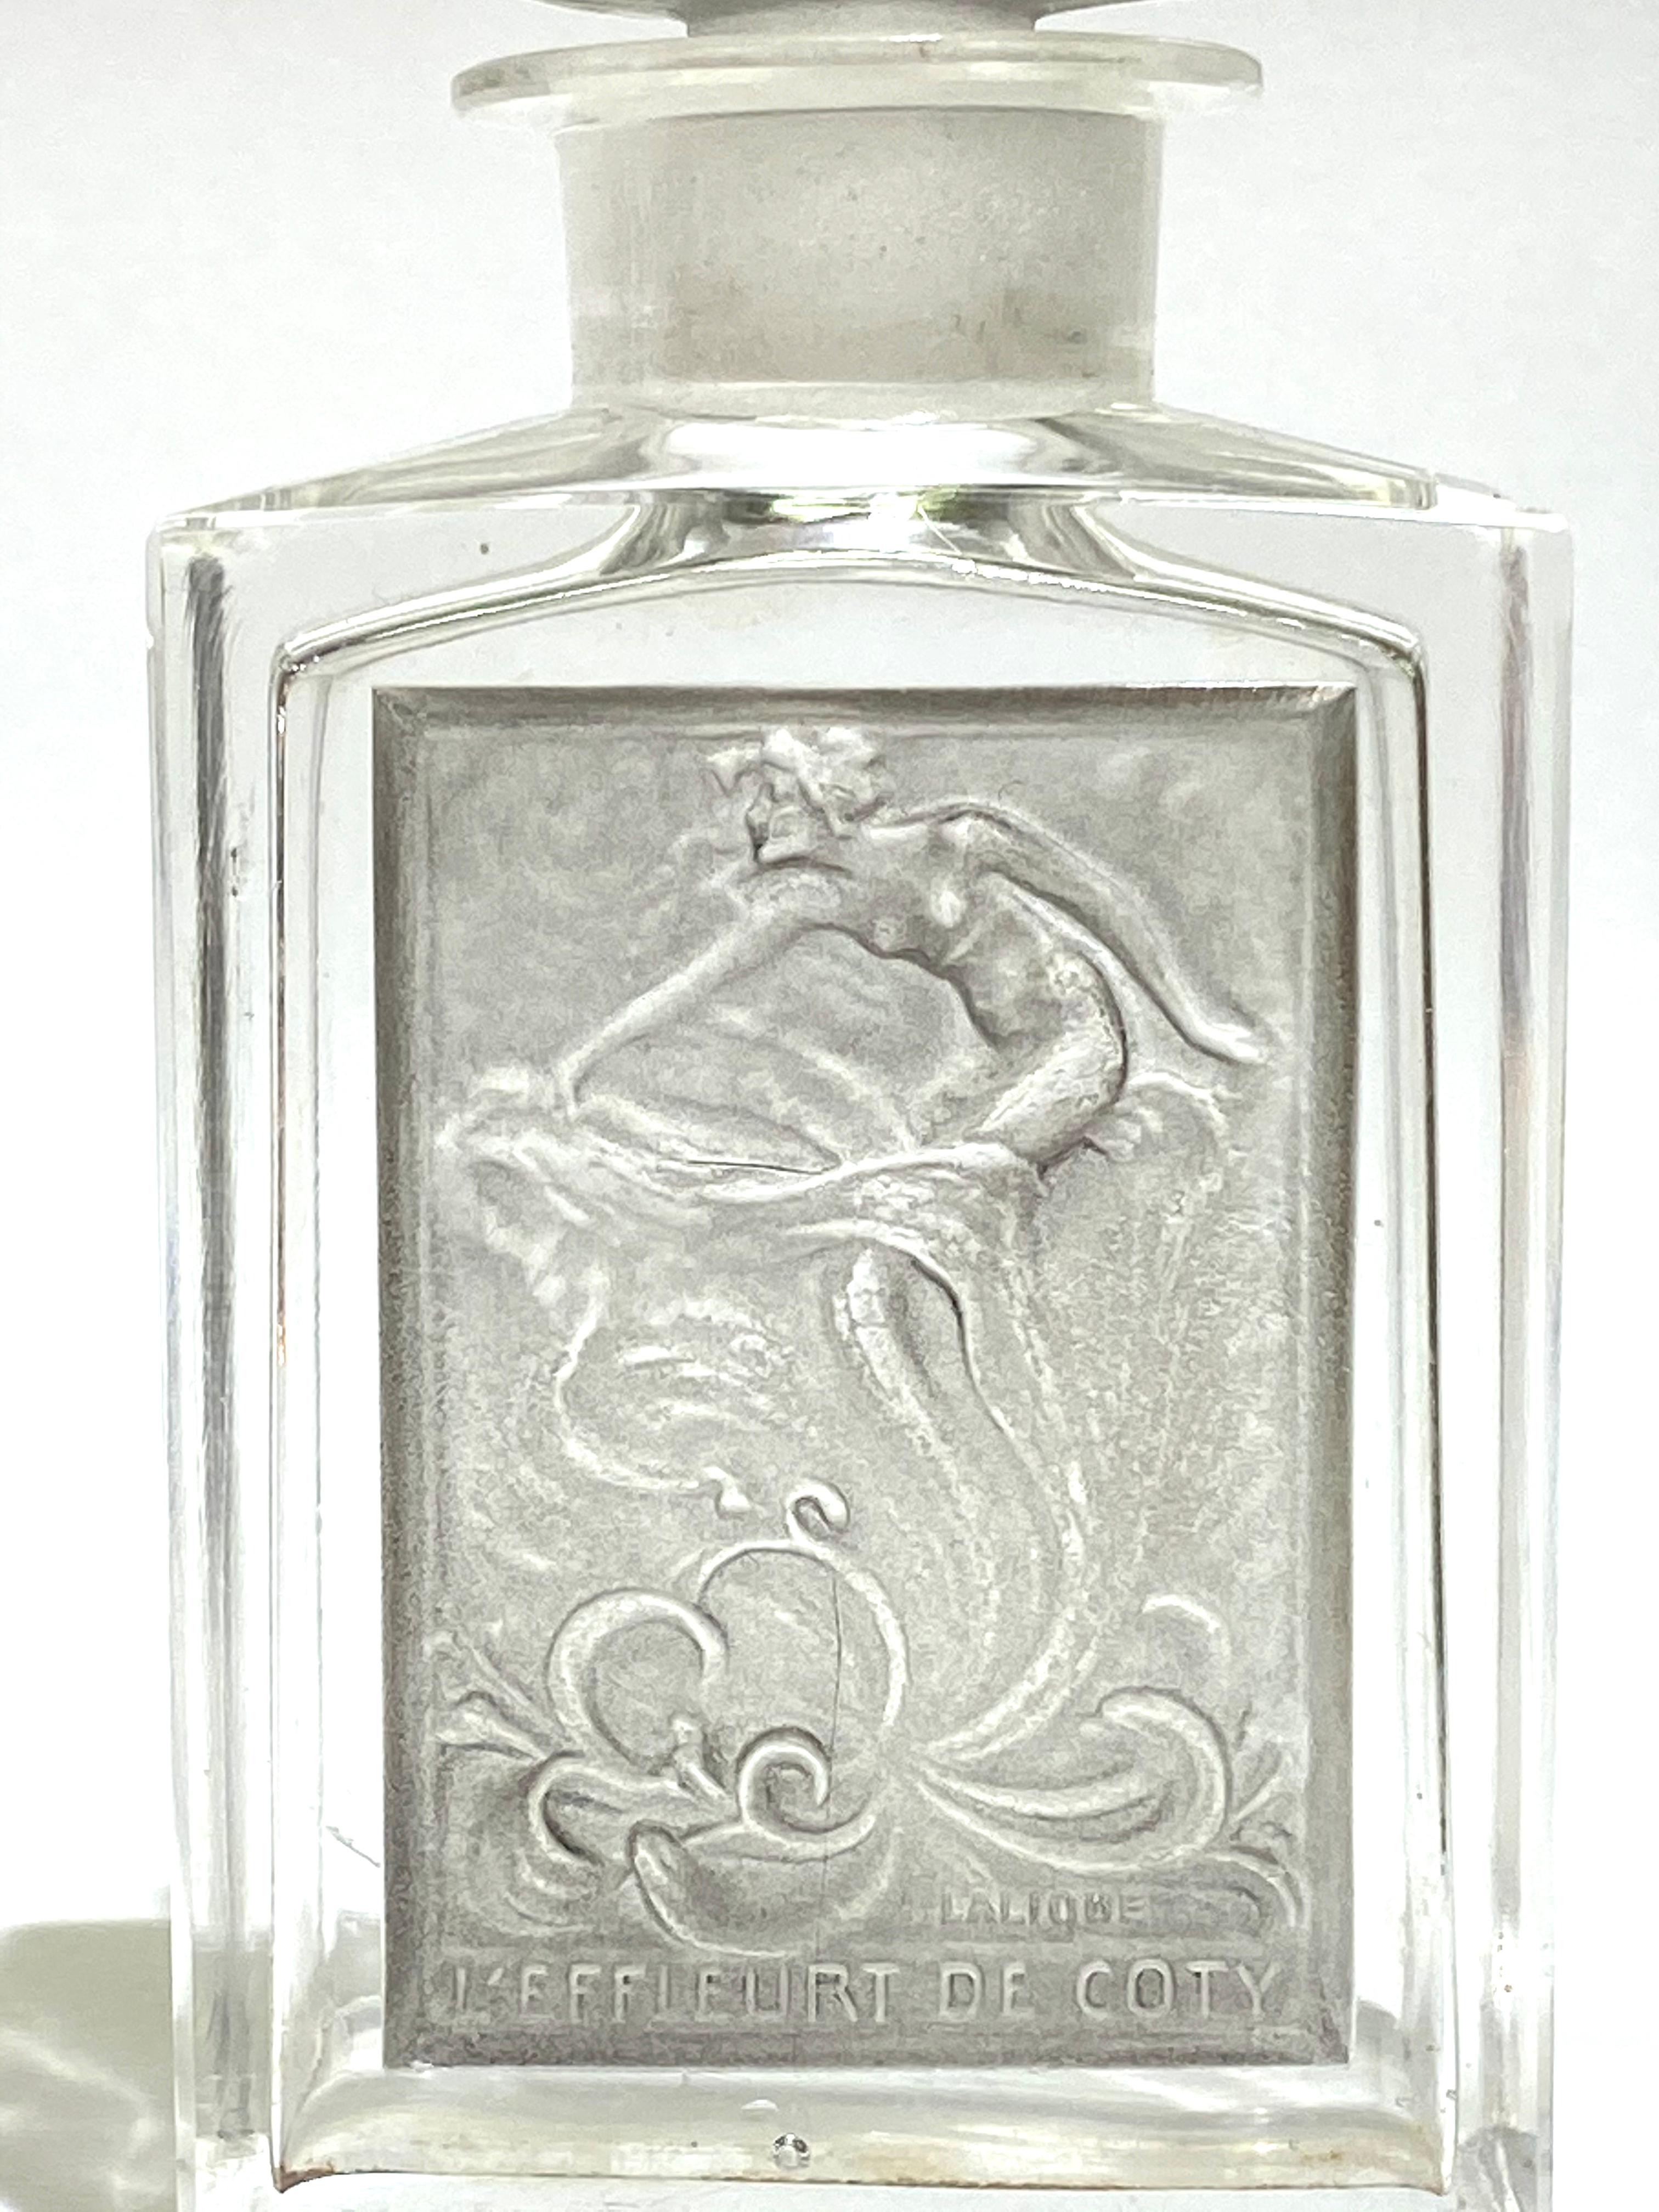 1911 Rene Lalique L'Effleurt for Coty Perfume Bottle Grey Stained Glass, Cicada 3